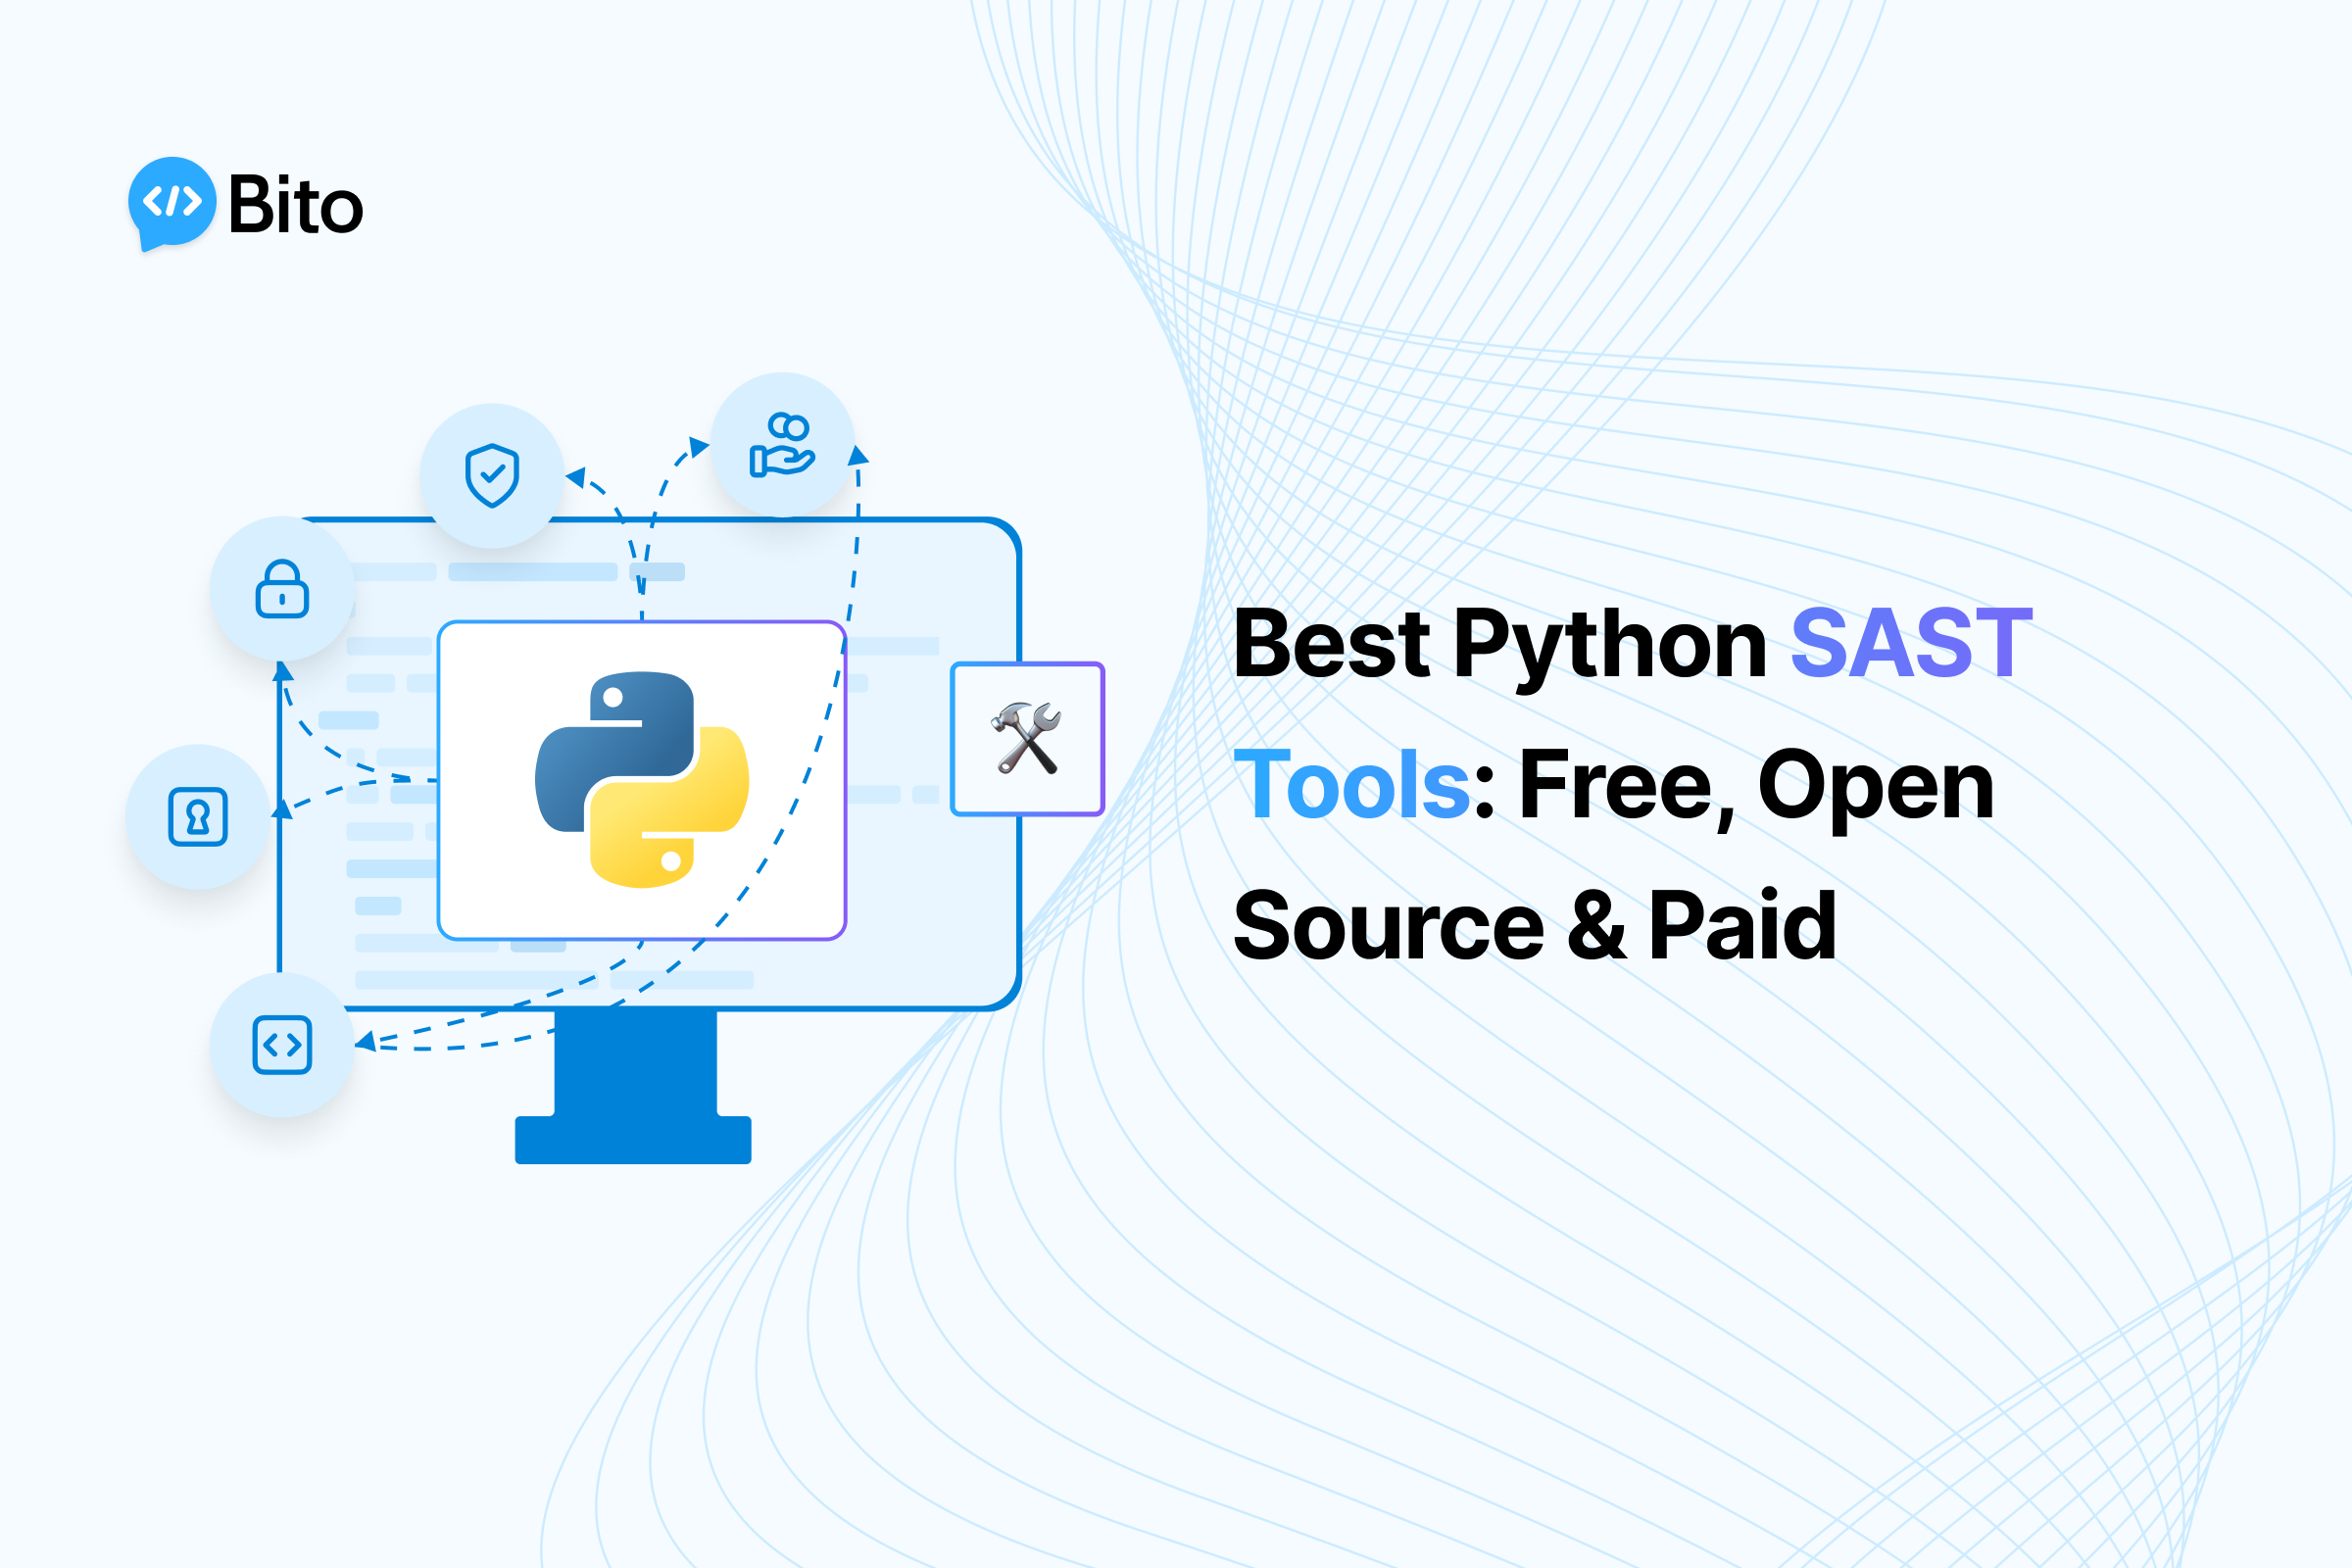 Best Python SAST Tools: Free, Open Source & Paid